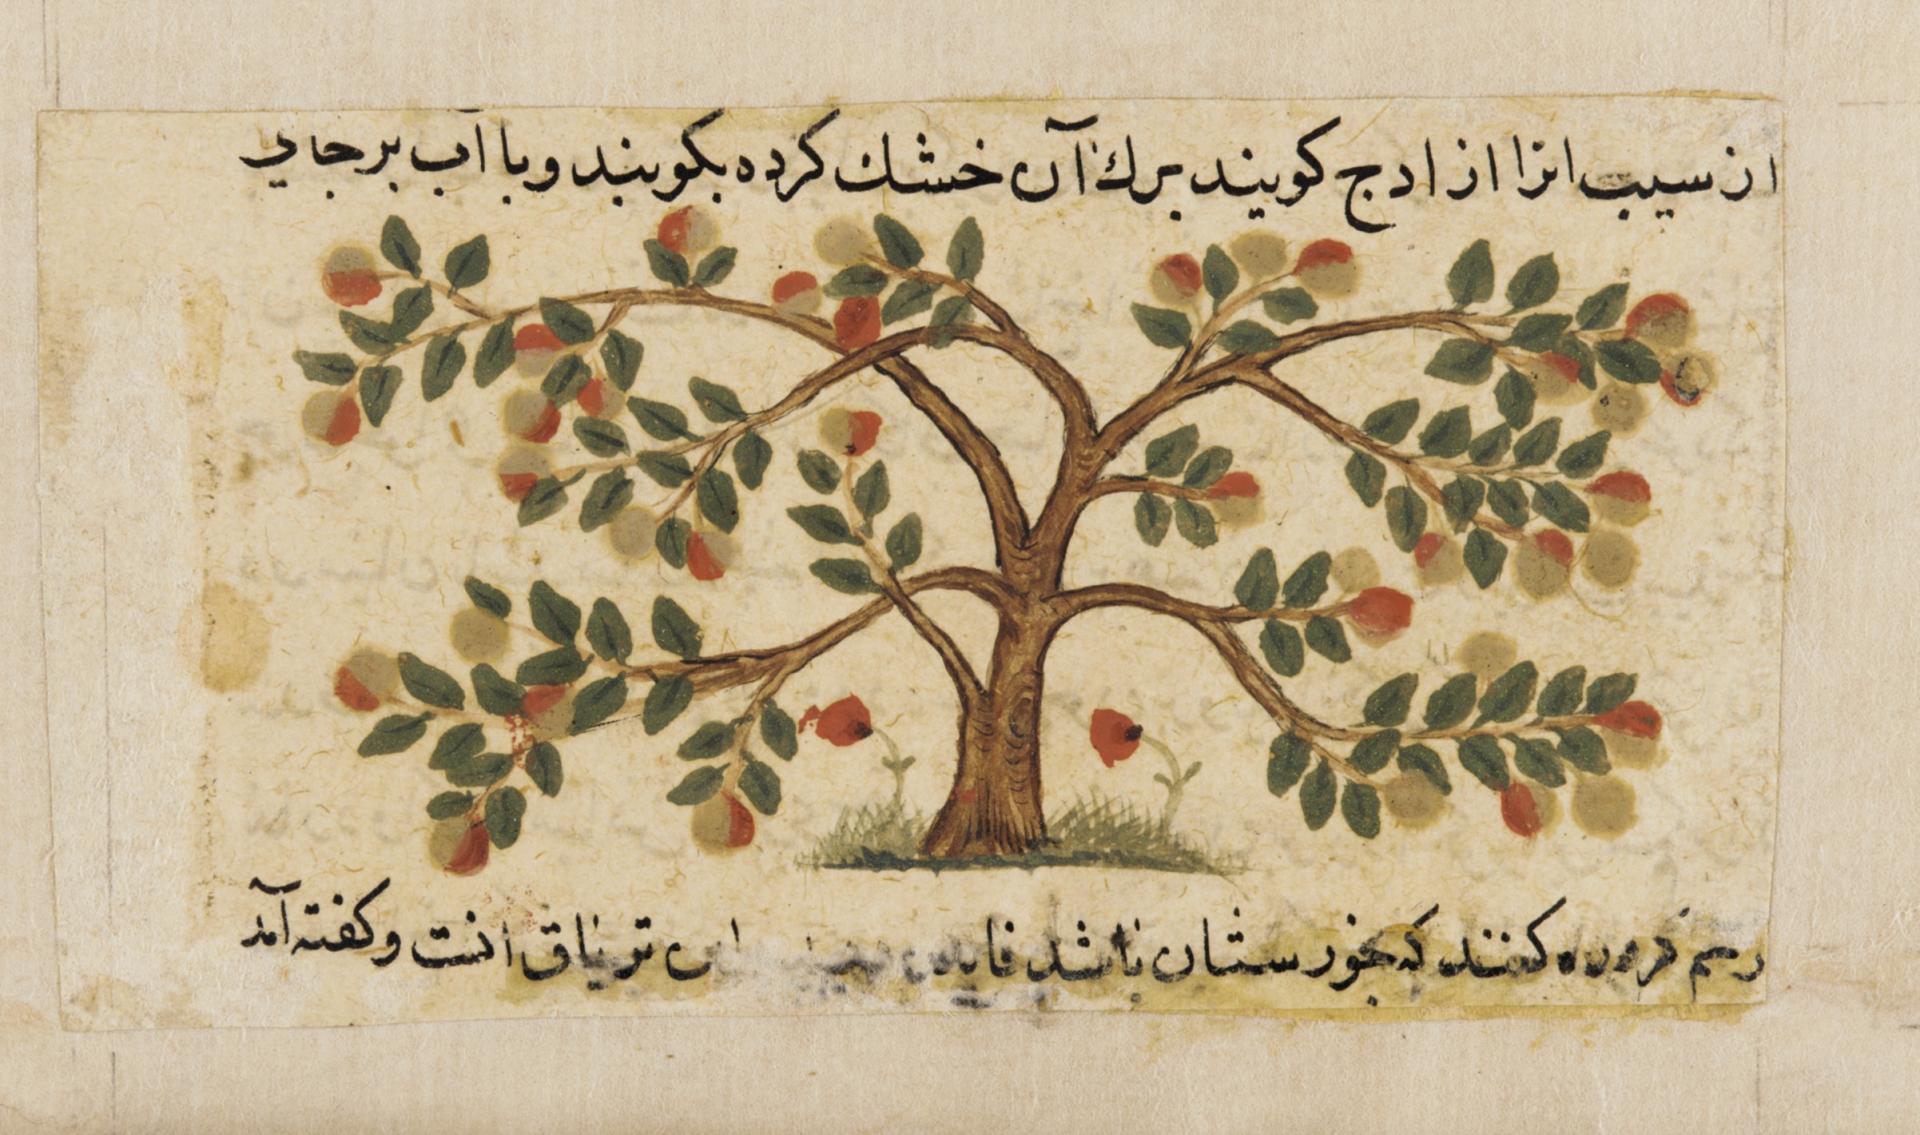 Image: Fragment of a page (mounted with F1937.38) showing an illustration of an apple tree with two poppy plants with an instruction for a preparation from an illustrated copy of the Persian Nuzhatnāmih-yi ‘alāyī (The Book of Counsel of ‘Alā) of Shahmardān Ibn Abī al-Kheir Rāzī.